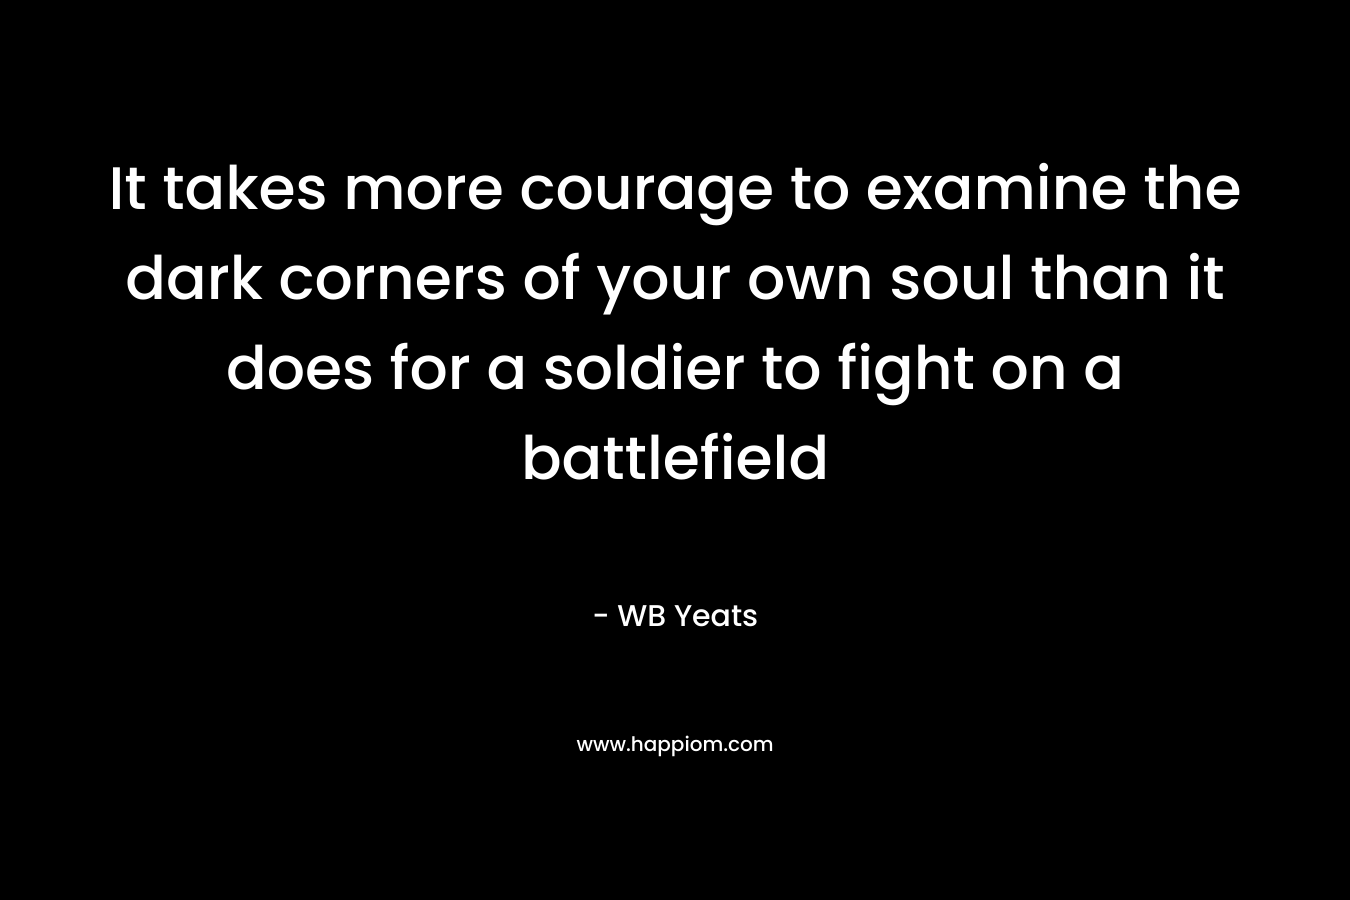 It takes more courage to examine the dark corners of your own soul than it does for a soldier to fight on a battlefield